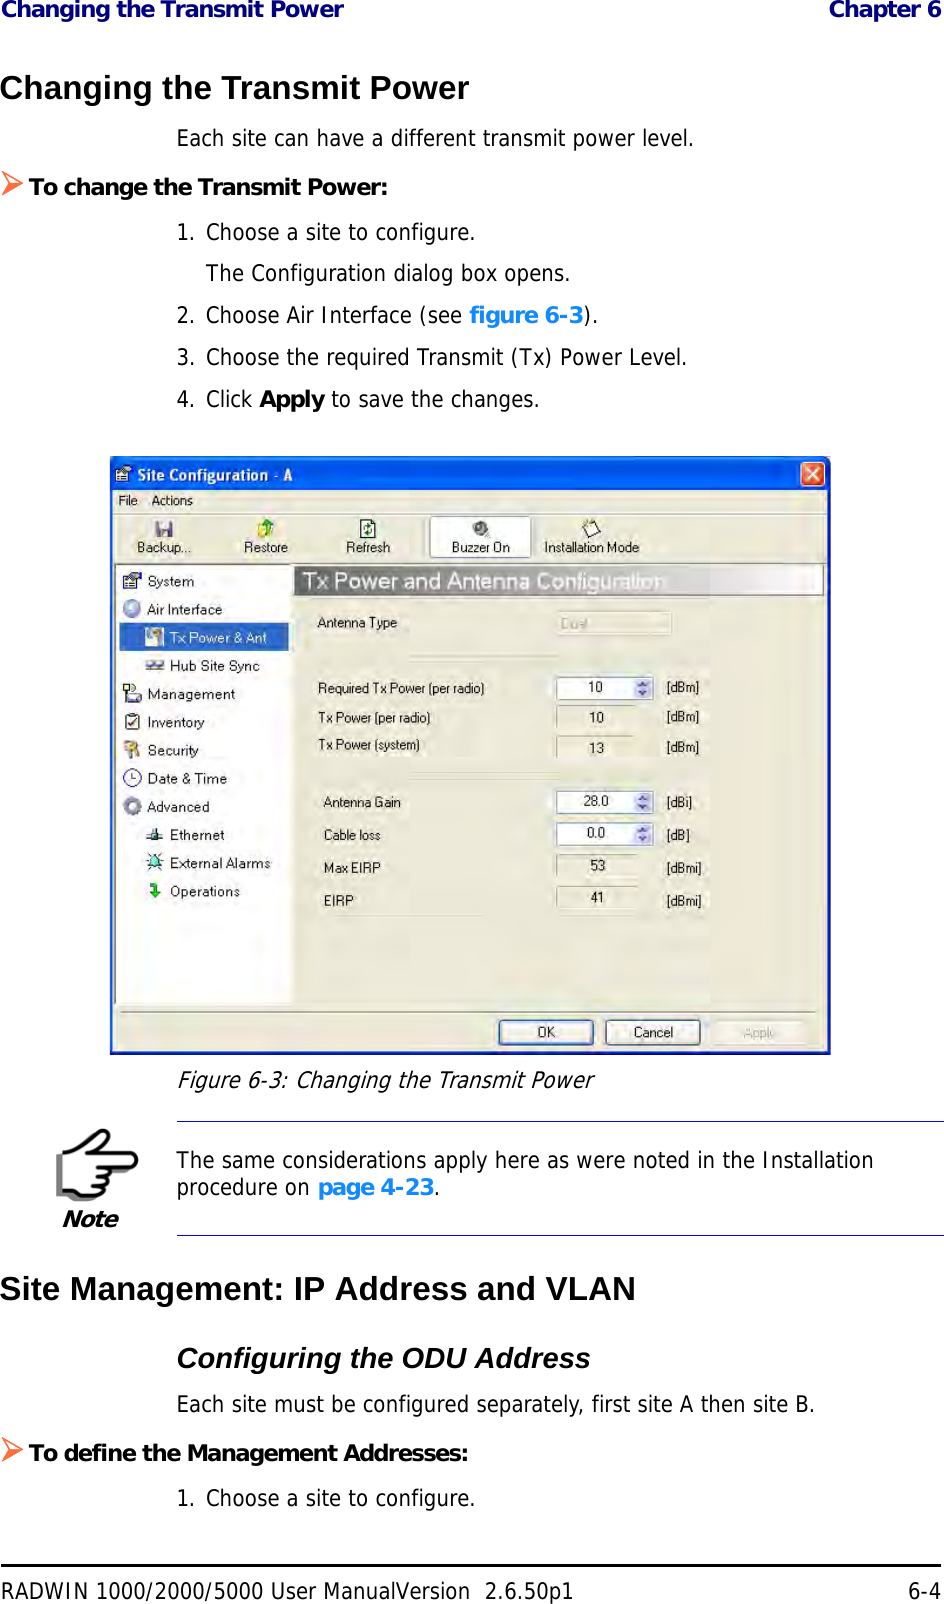 Changing the Transmit Power  Chapter 6RADWIN 1000/2000/5000 User ManualVersion  2.6.50p1 6-4Changing the Transmit PowerEach site can have a different transmit power level. To change the Transmit Power:1. Choose a site to configure.The Configuration dialog box opens.2. Choose Air Interface (see figure 6-3).3. Choose the required Transmit (Tx) Power Level.4. Click Apply to save the changes.Figure 6-3: Changing the Transmit PowerSite Management: IP Address and VLANConfiguring the ODU AddressEach site must be configured separately, first site A then site B.To define the Management Addresses:1. Choose a site to configure.NoteThe same considerations apply here as were noted in the Installation procedure on page 4-23.